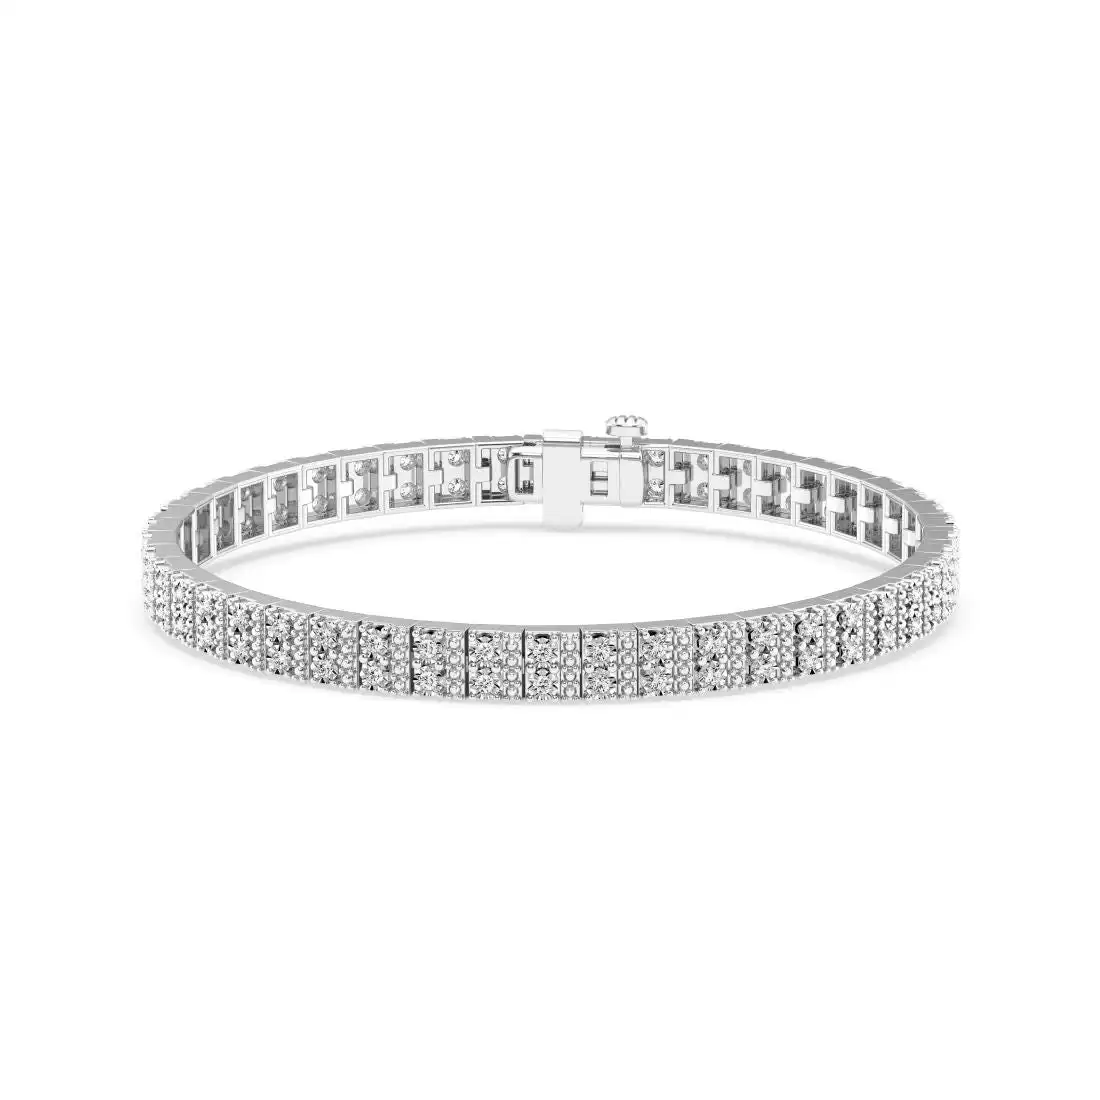 Mirage Multi Row Bracelet with 2.00ct of Laboratory Grown Diamonds in Sterling Silver and Platinum